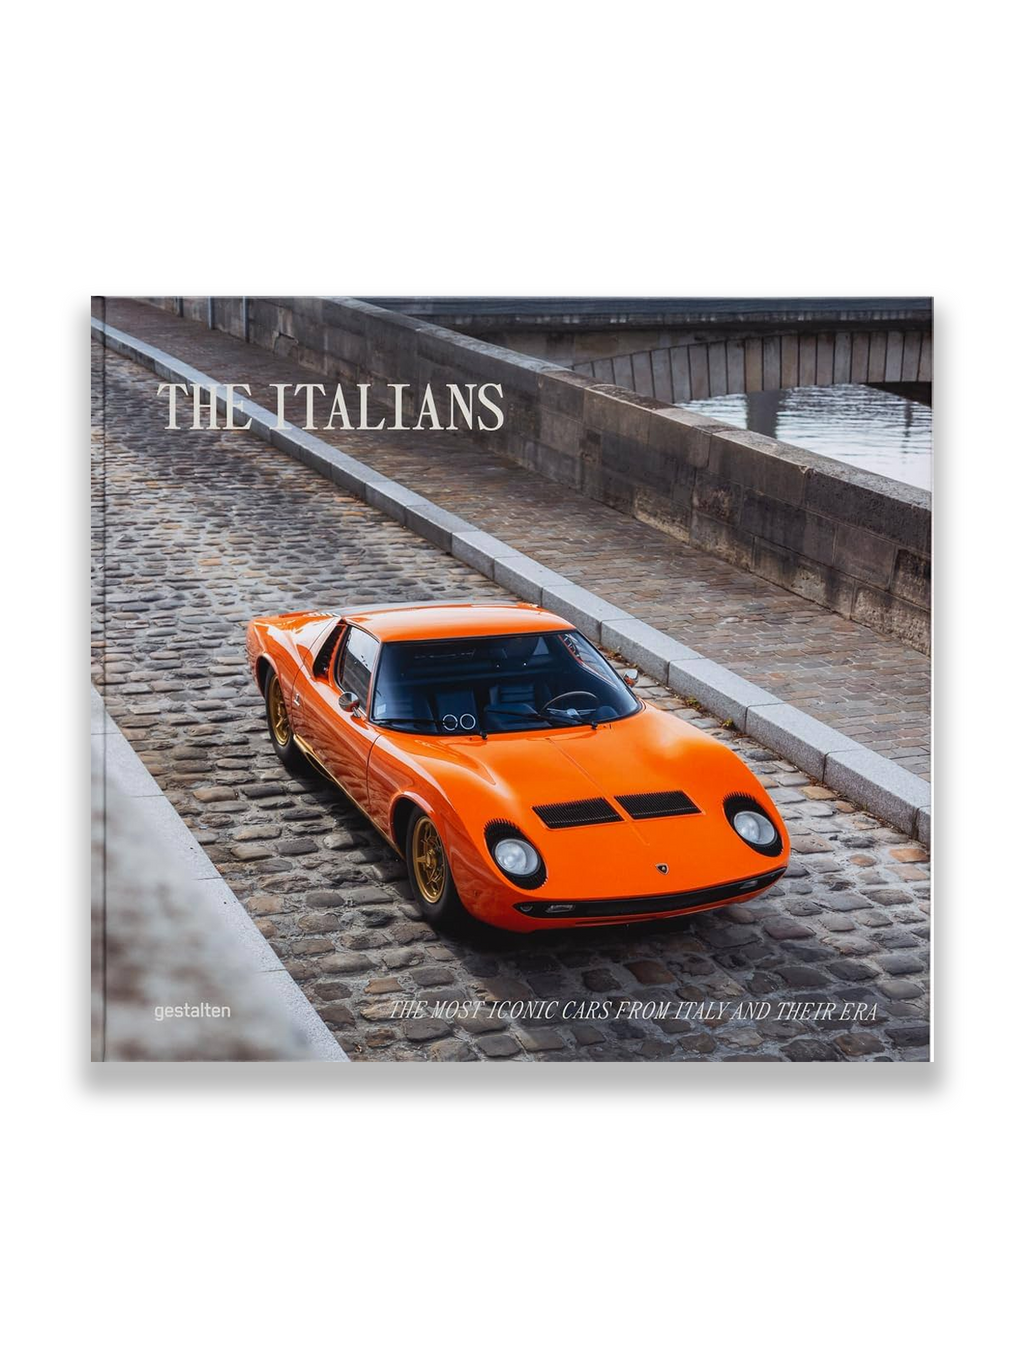 The Italians - The Most Iconic Cars from Italy and Their Era